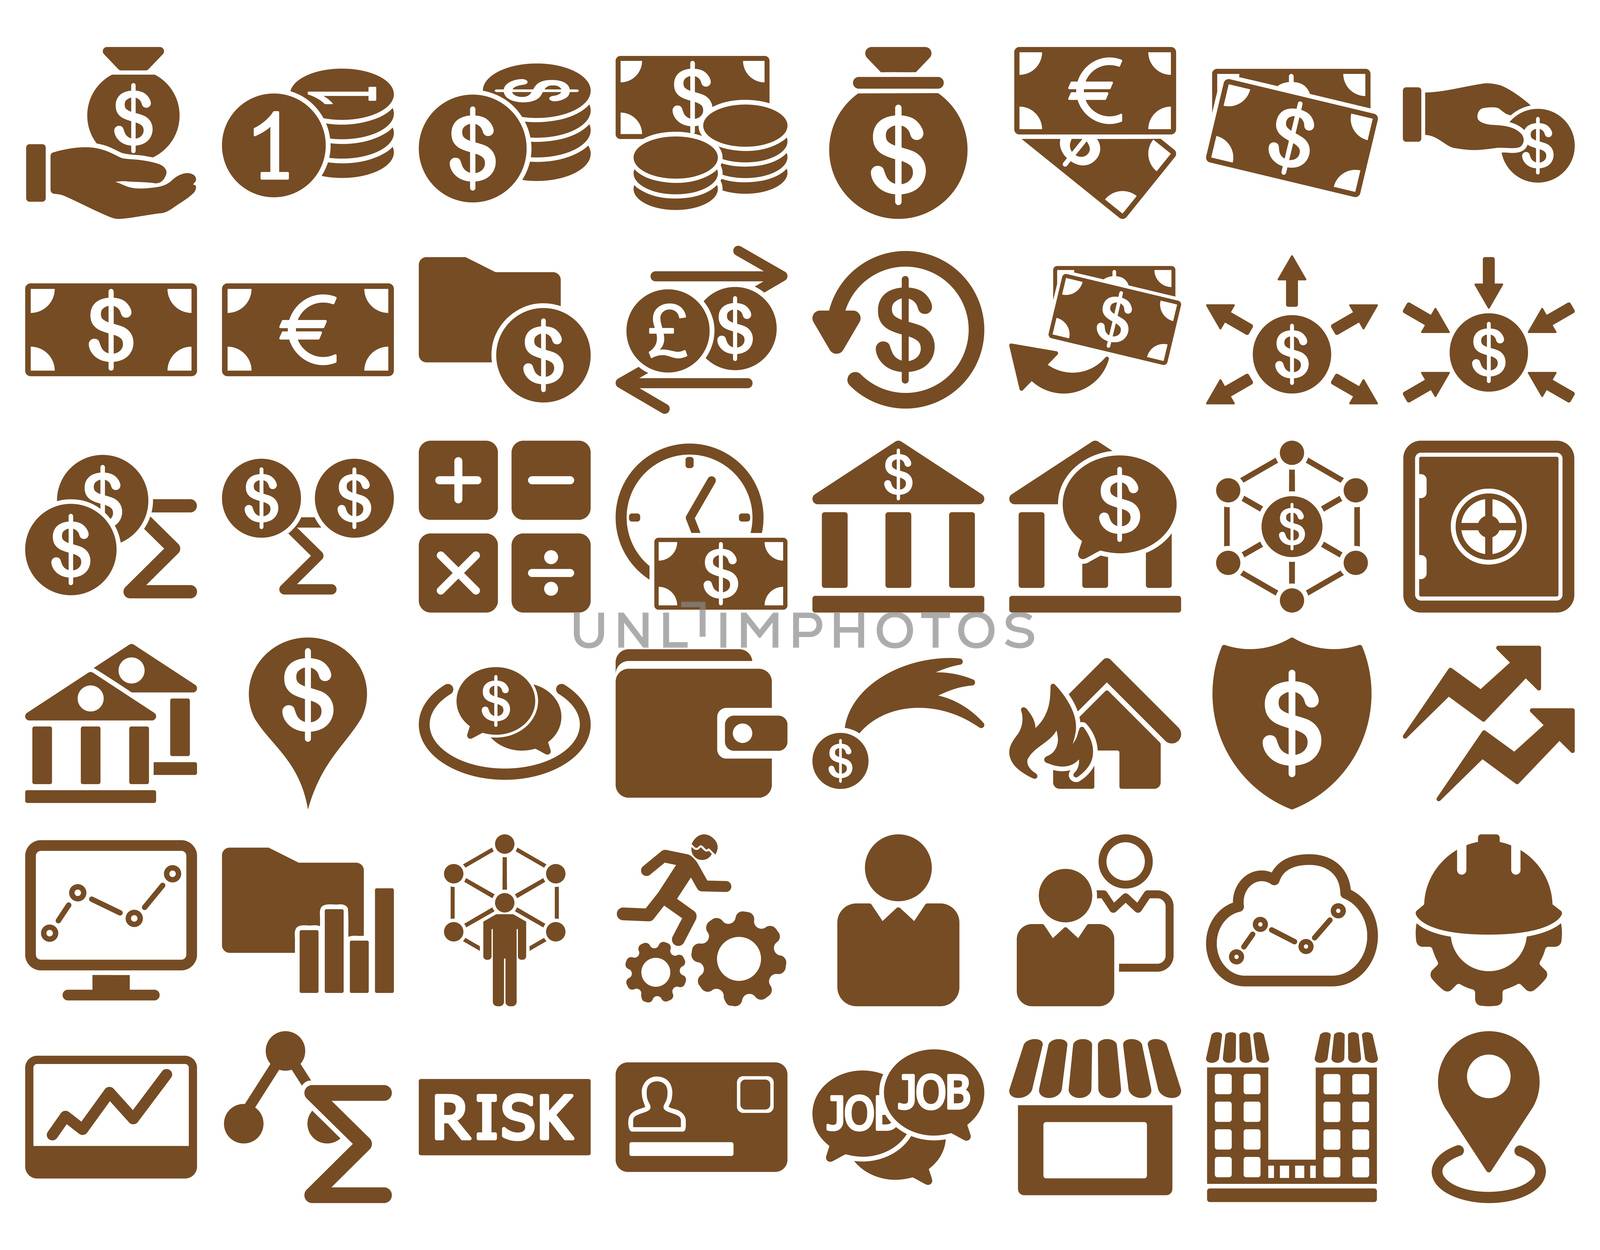 Business Icon Set. These flat icons use brown color. Raster images are isolated on a white background.